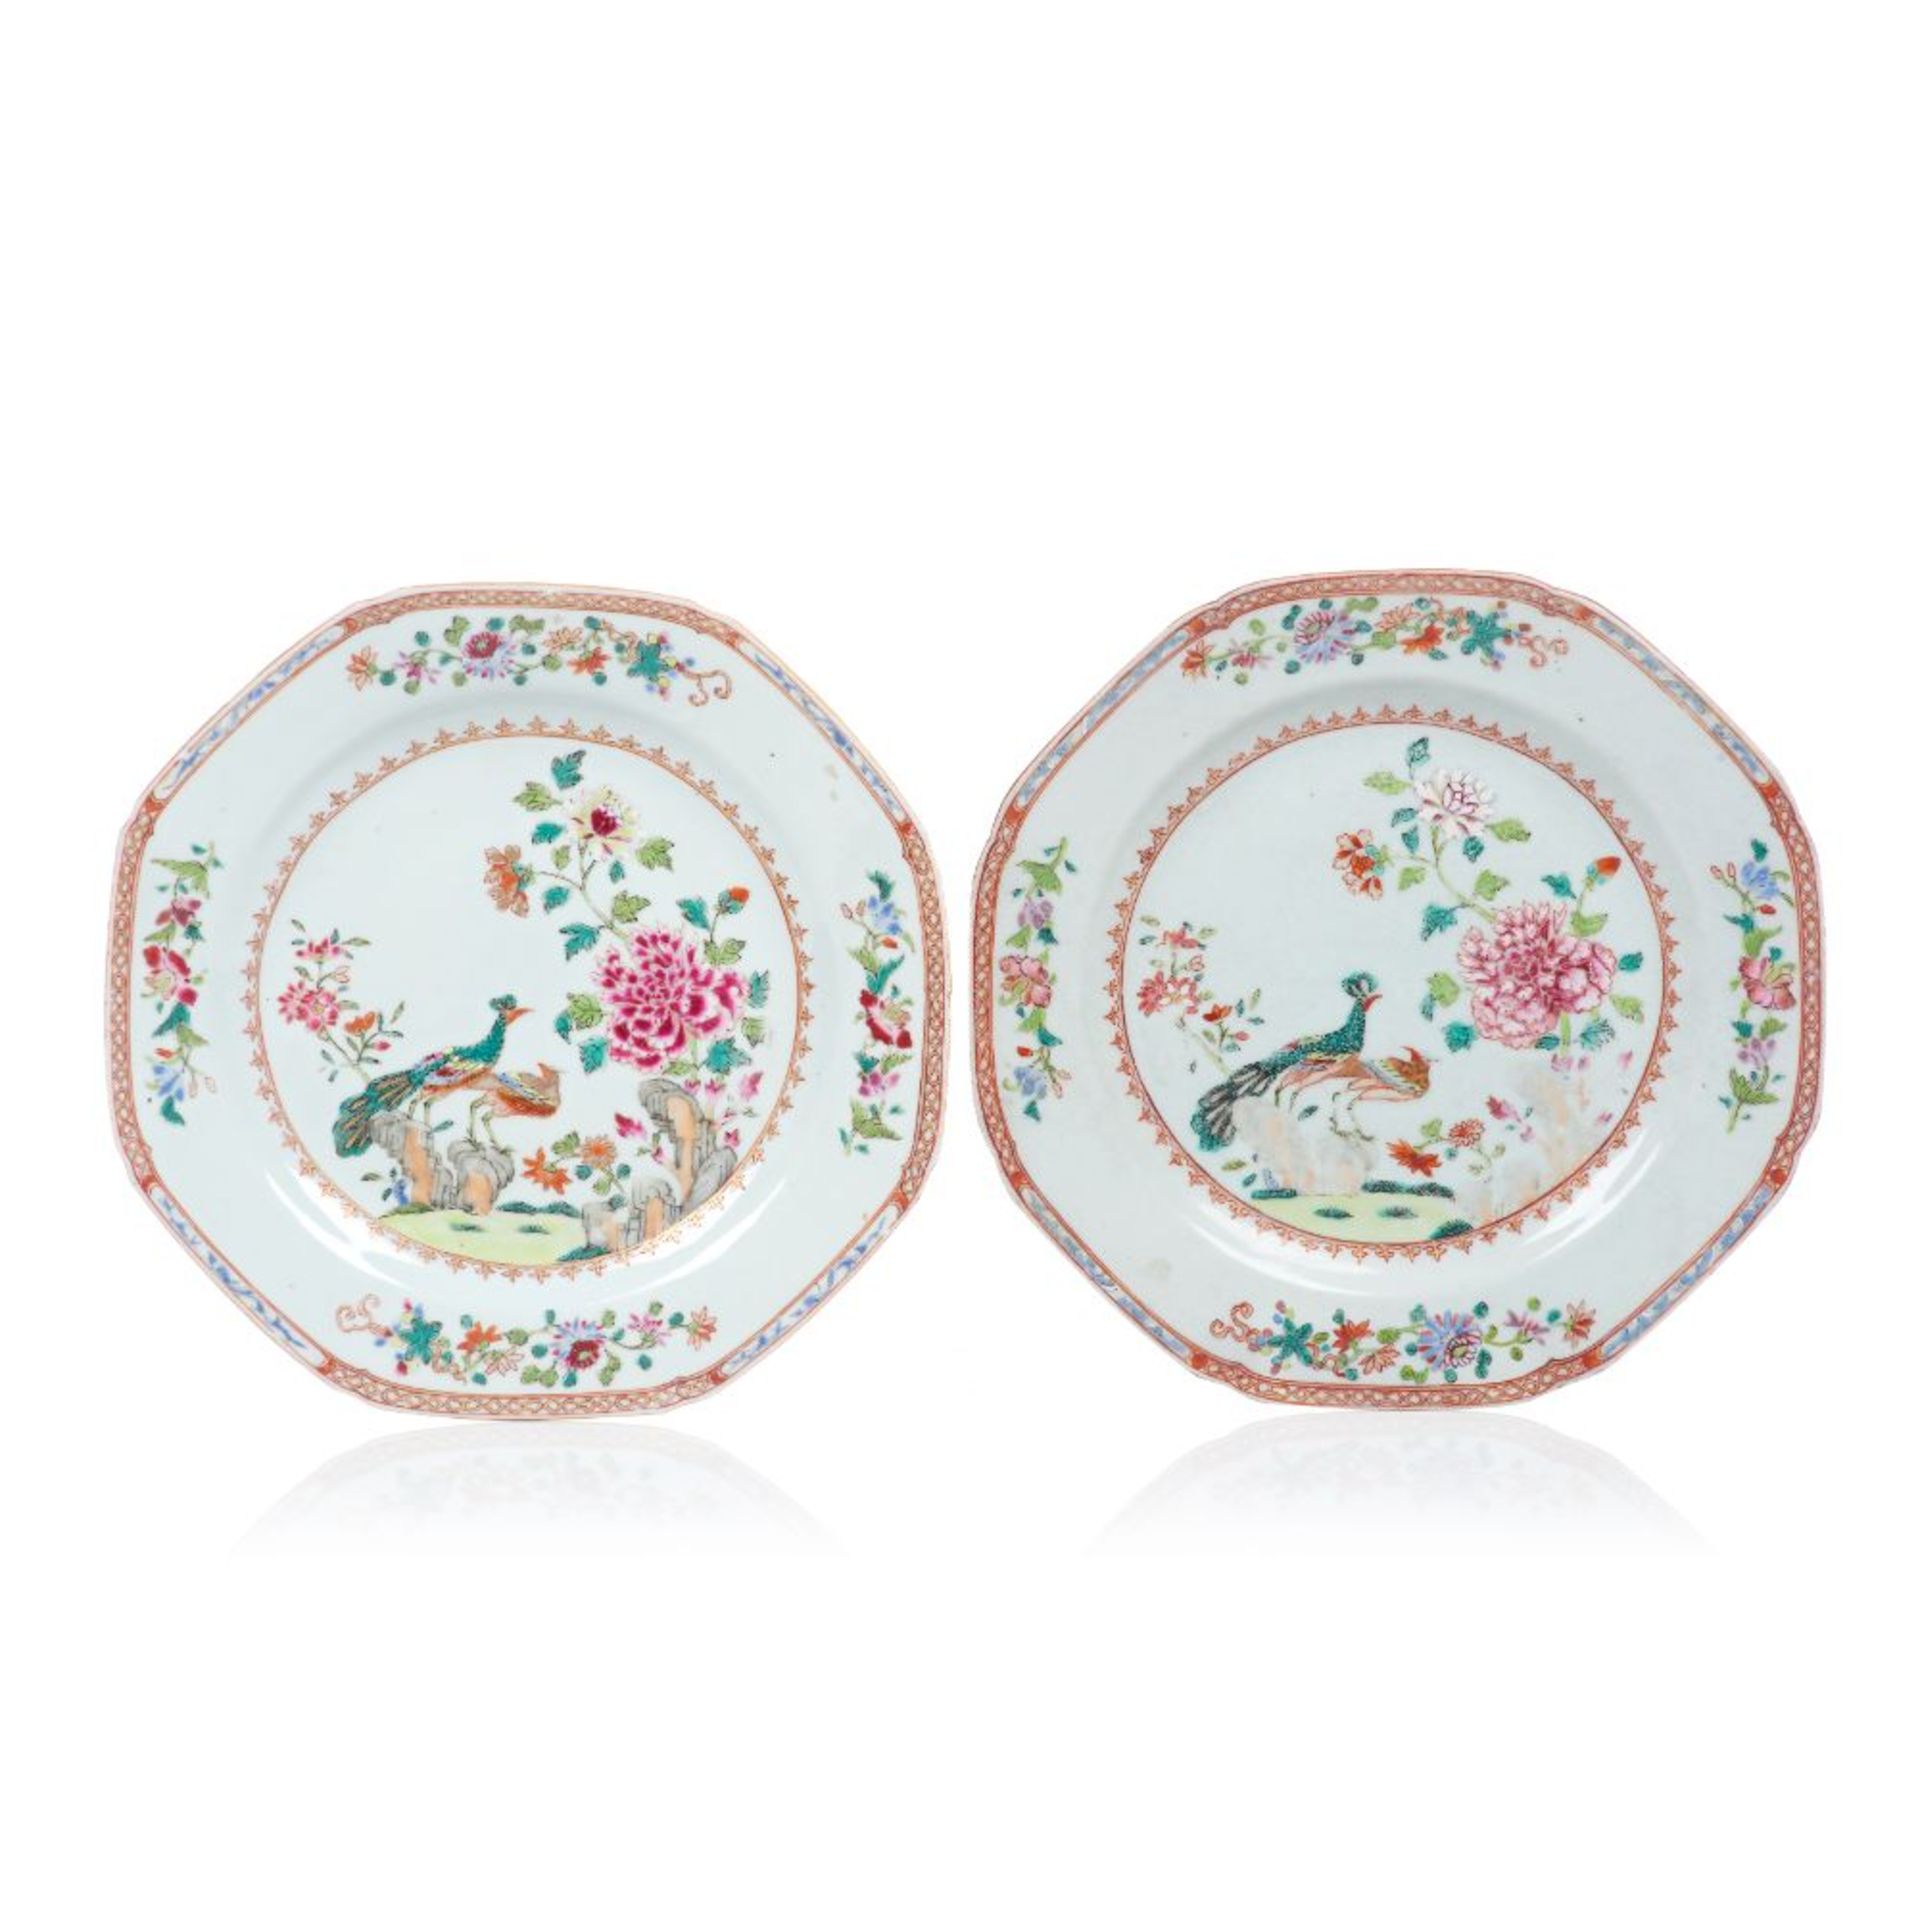 A pair of octagonal plates, Chinese export porcelain, Polychrome "Famille Rose" enamelled decoration